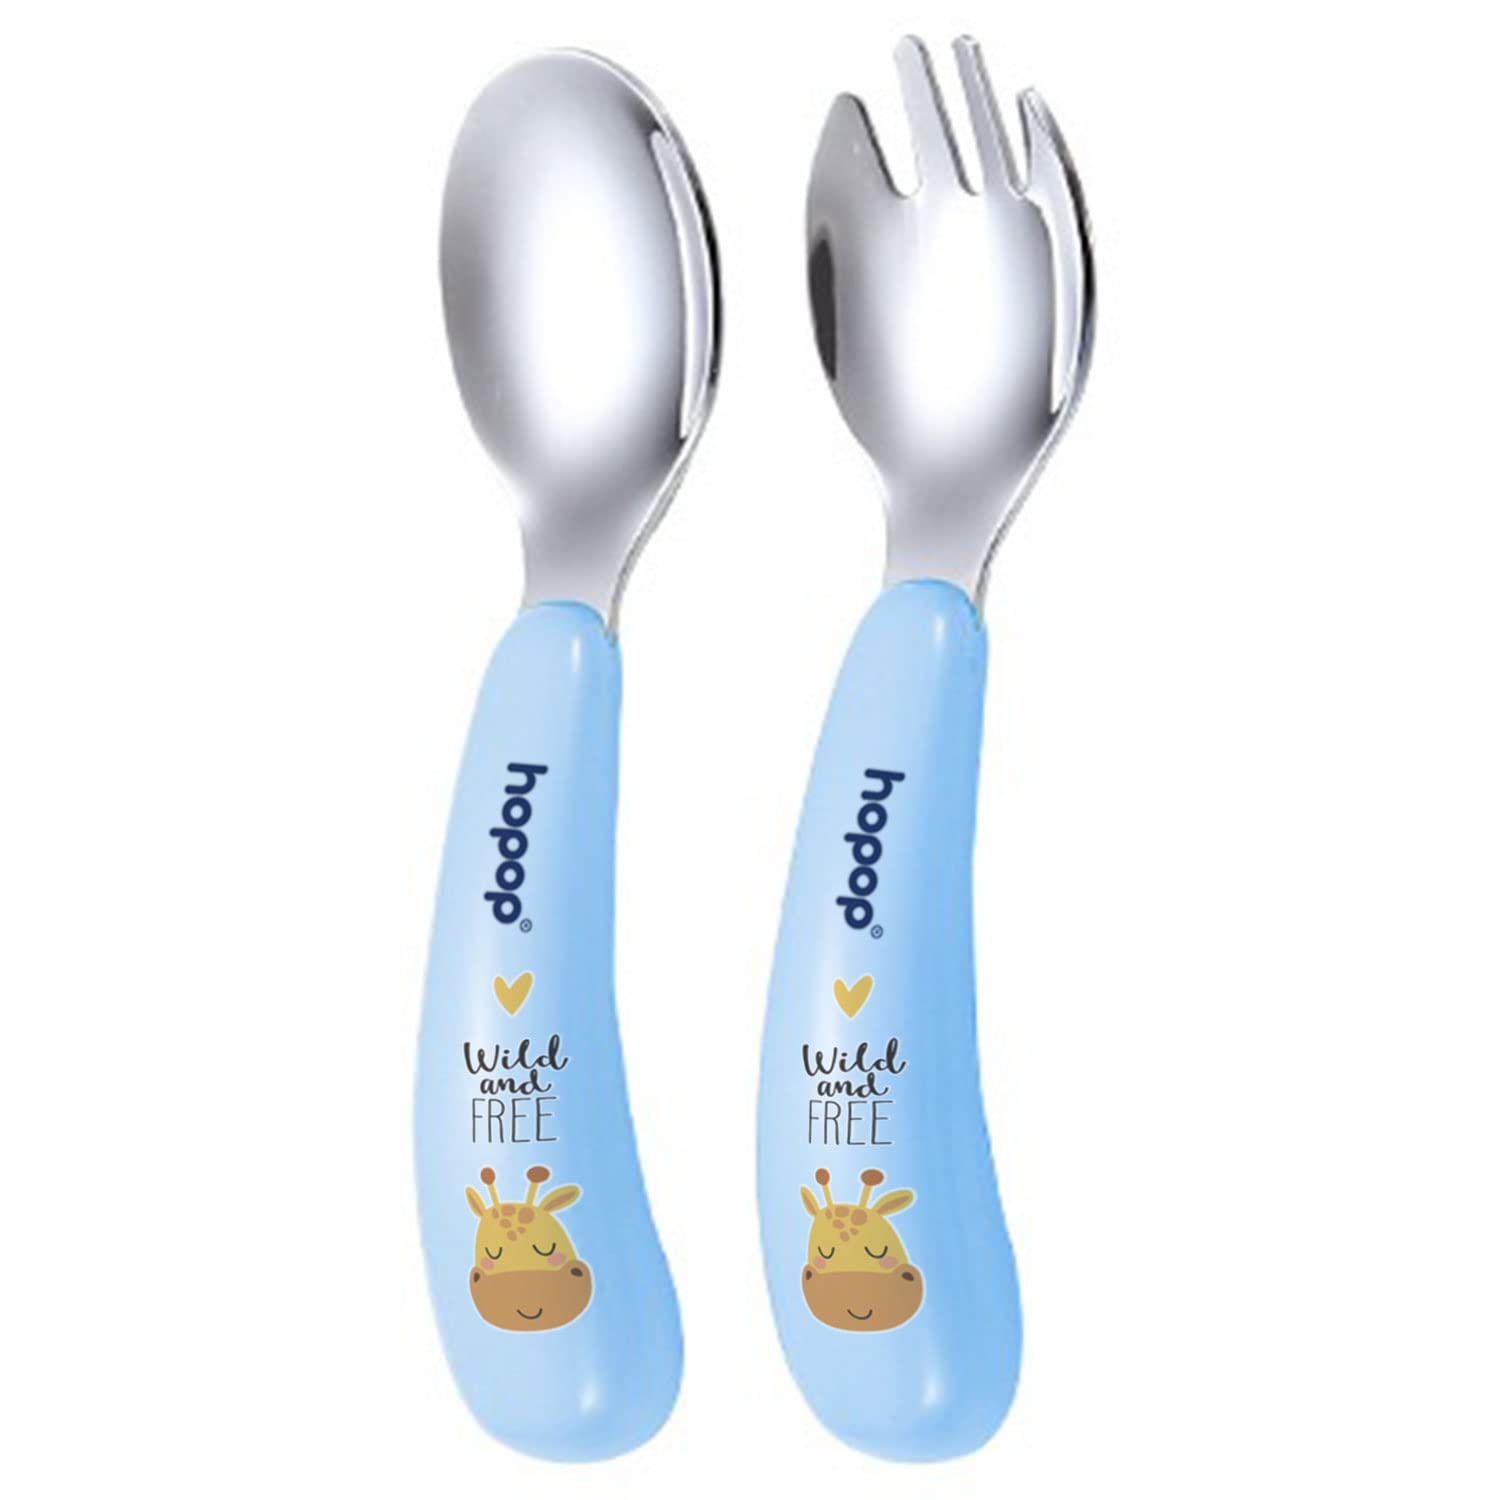 Hopop Spoon & Fork with Travel Case For Babies - Blue 6m+